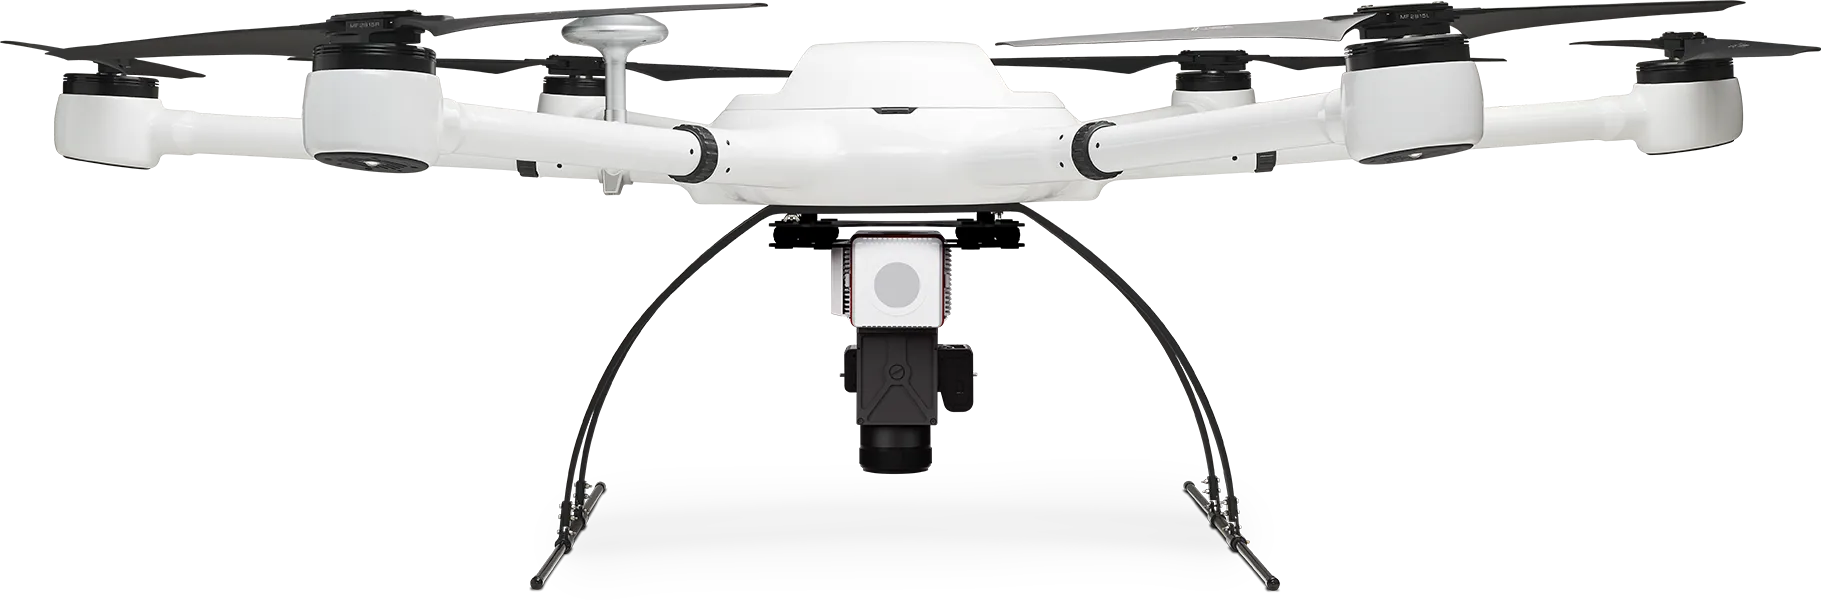 Exabotix Atlas LiDAR Industrial drone front view with combined LiDAR scanner and camera for accurate true color 3D scanning and mapping tasks.